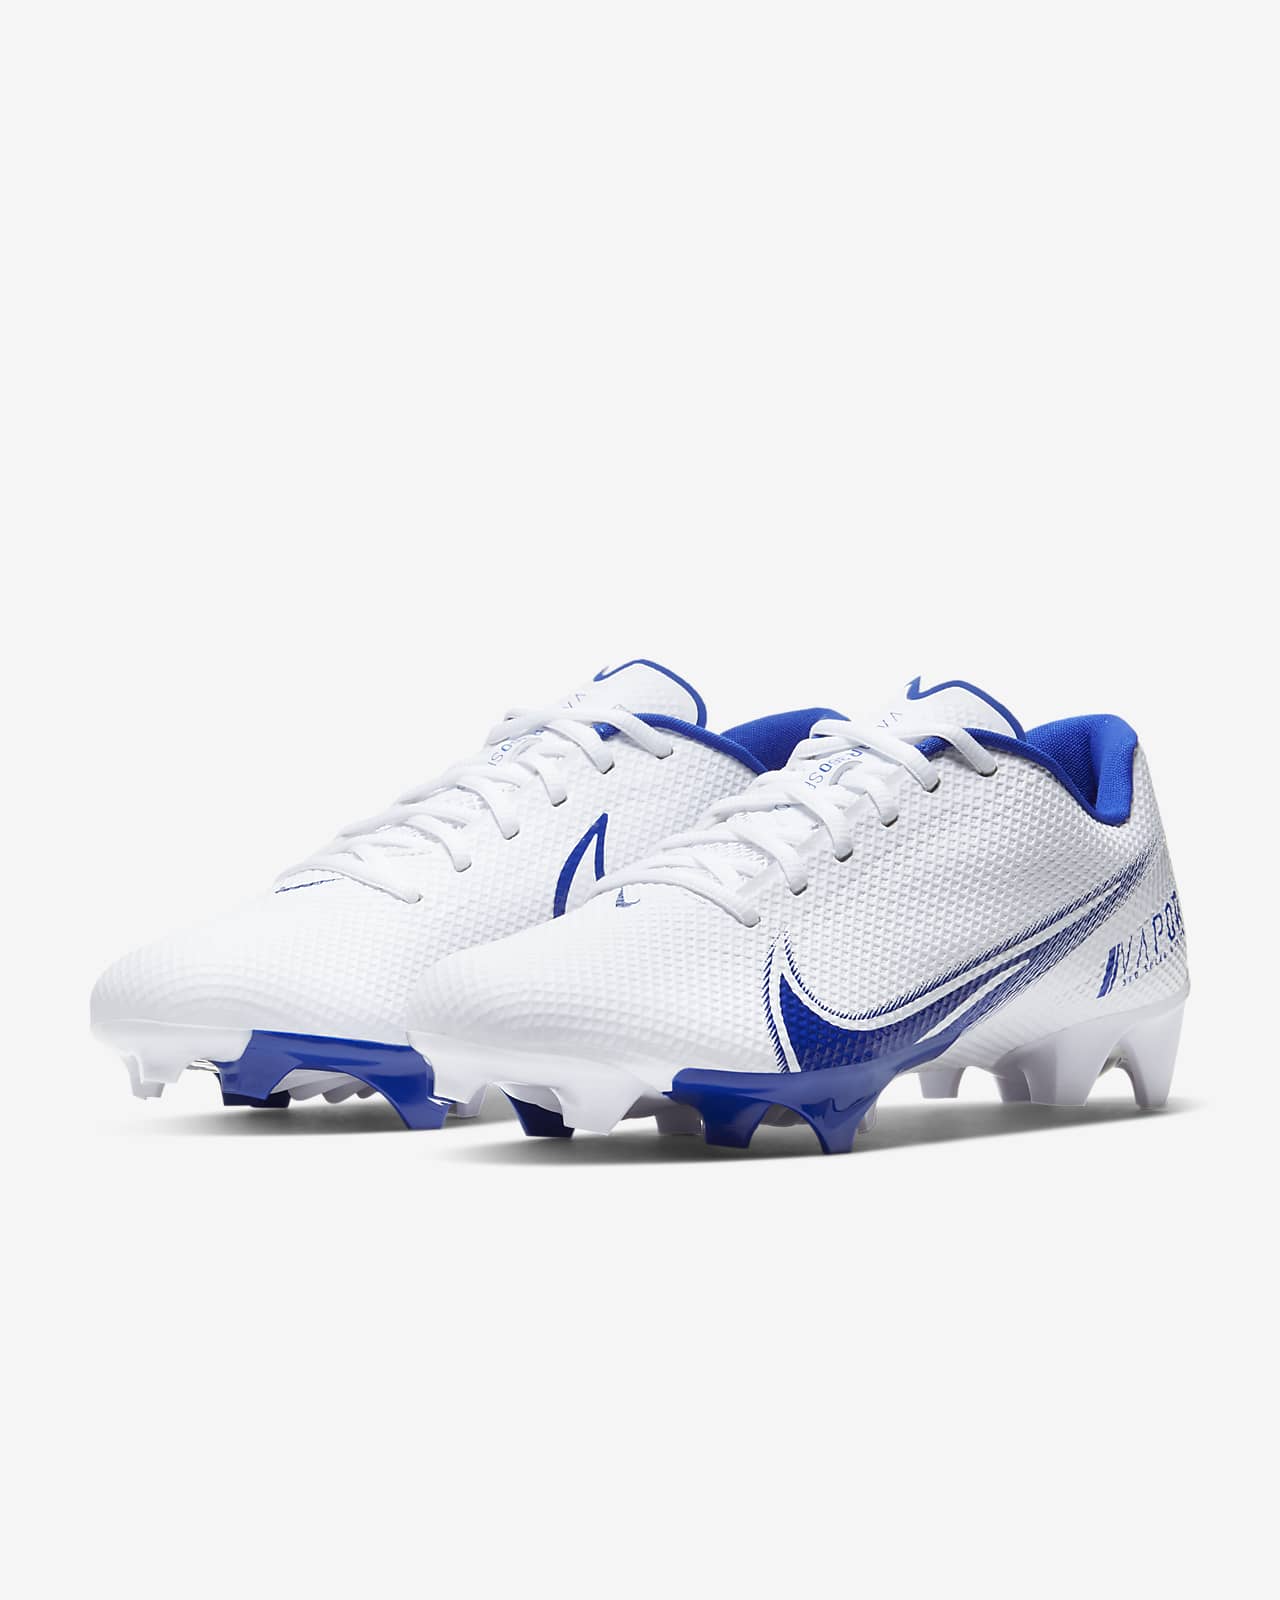 nike vapor cleats blue and white